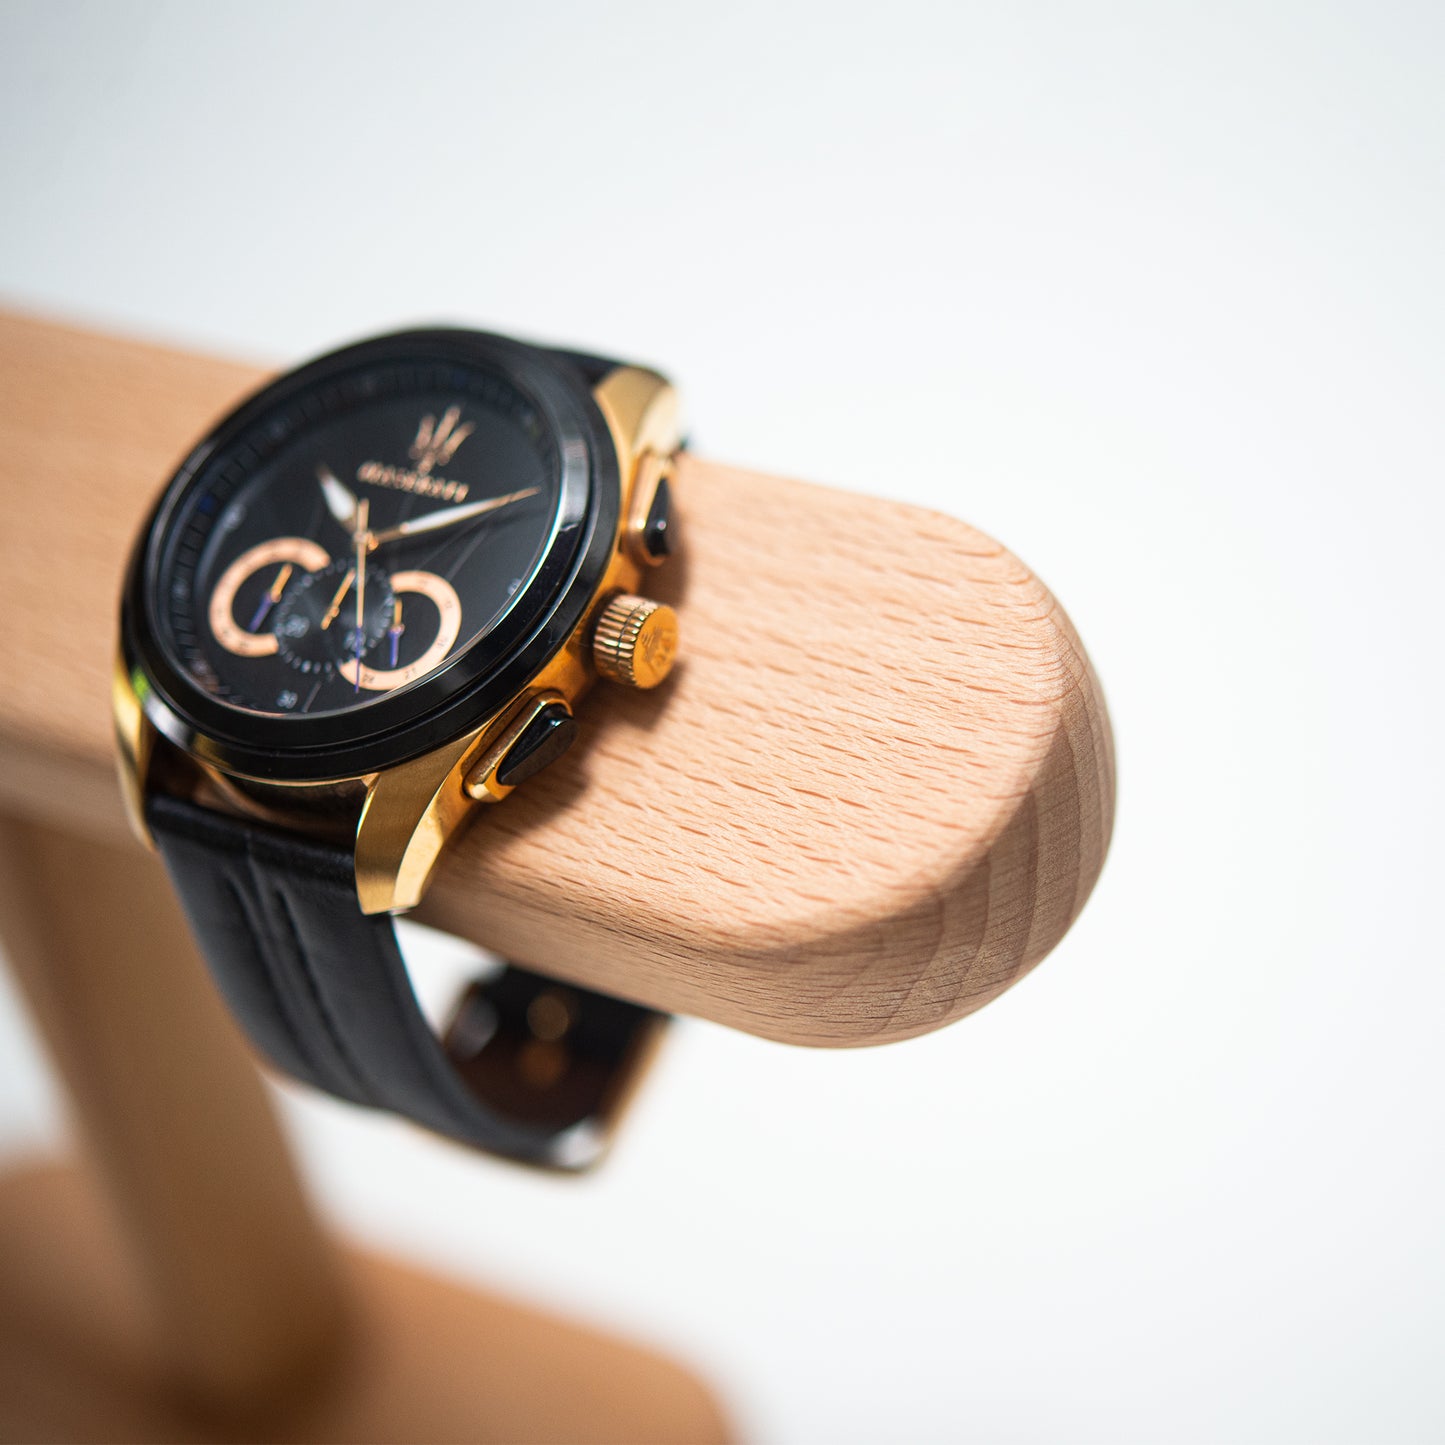 Personalized Wooden Watch Stand